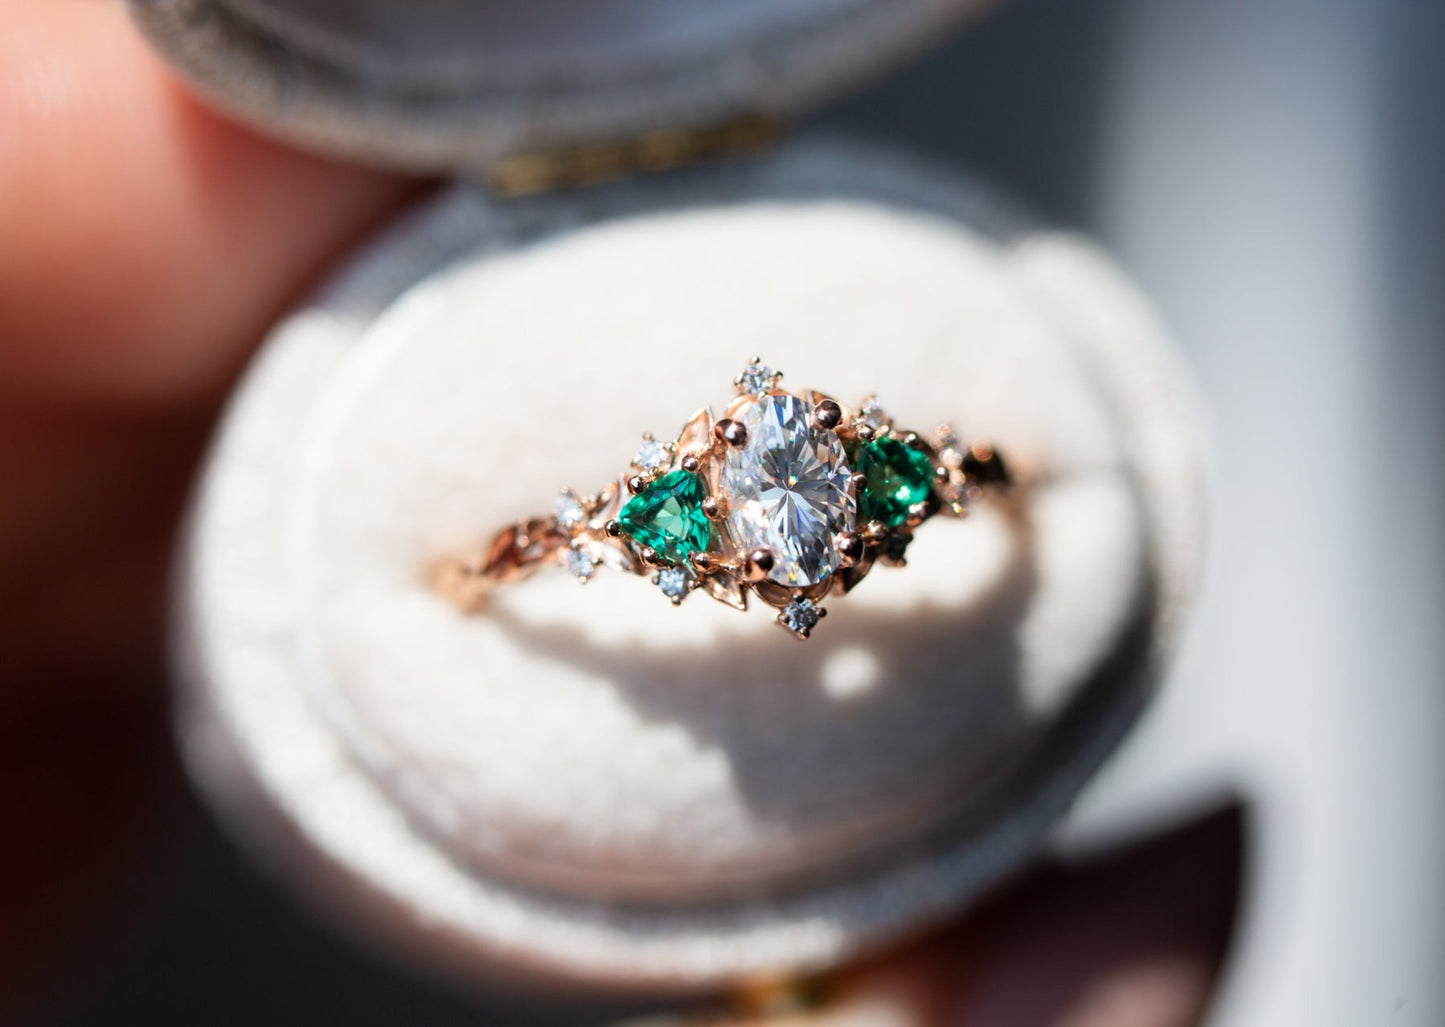 Get the Perfect Emerald Engagement Rings | GLAMIRA.in